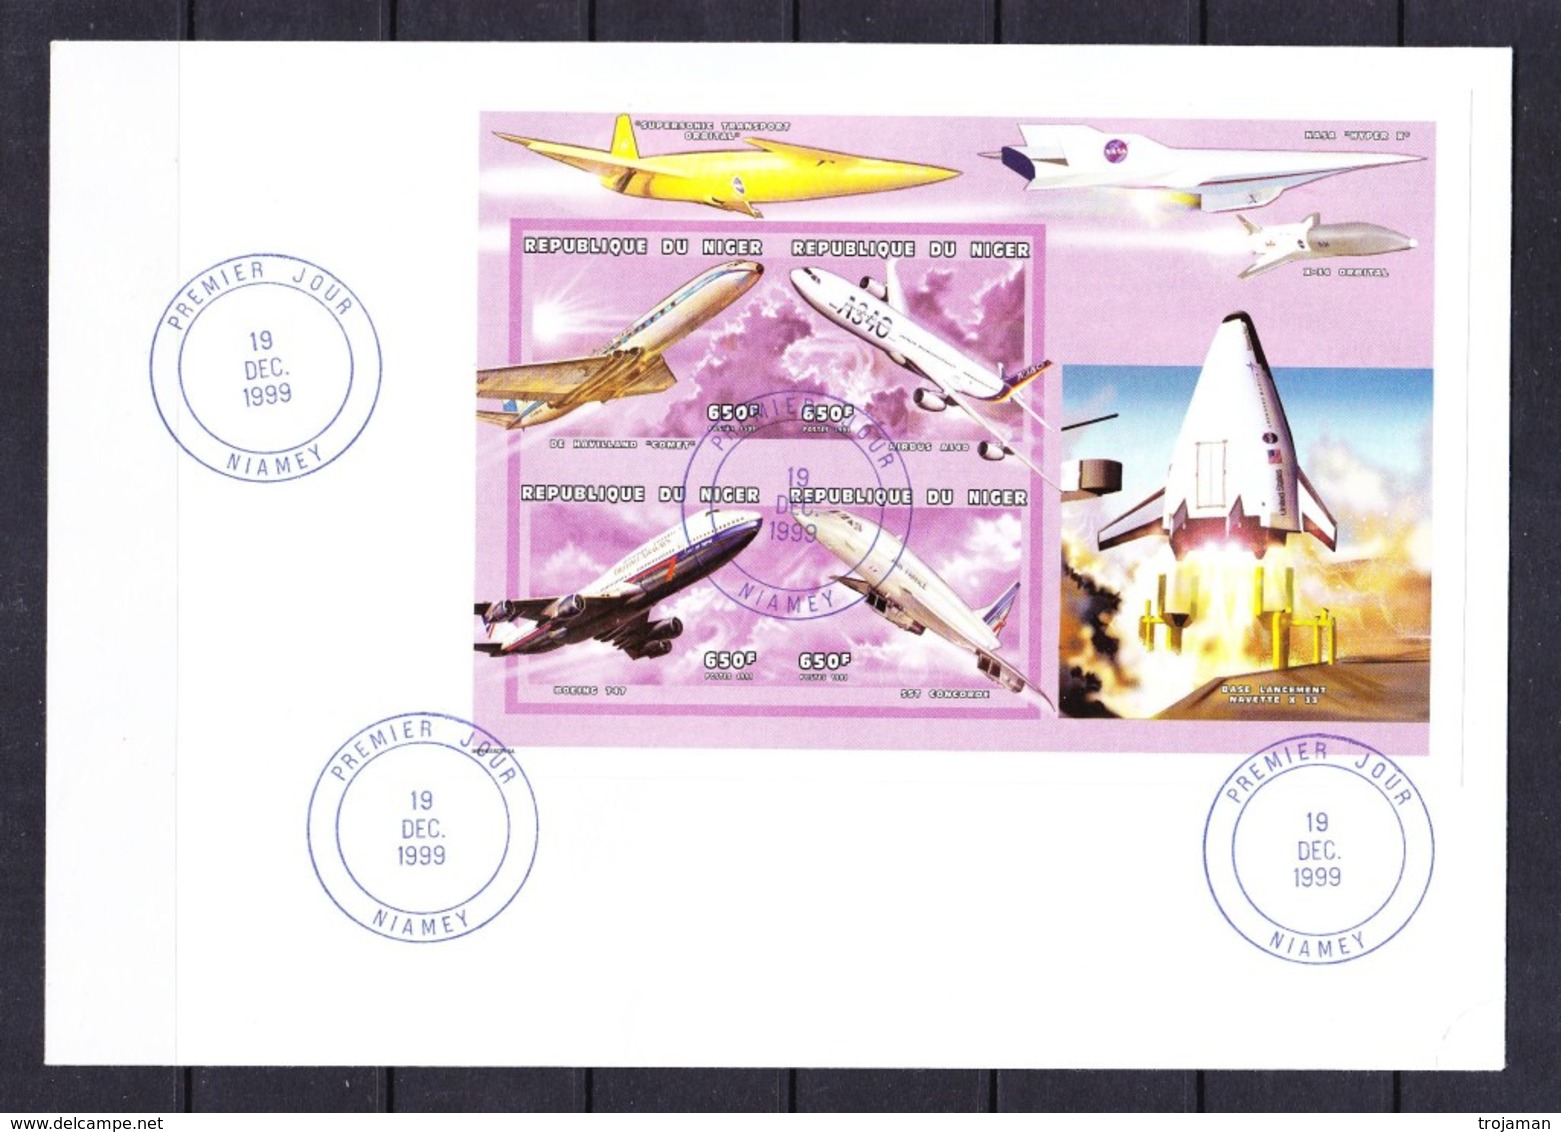 FDC-14 NIGER - 1999. UNPERFORATED. - Africa